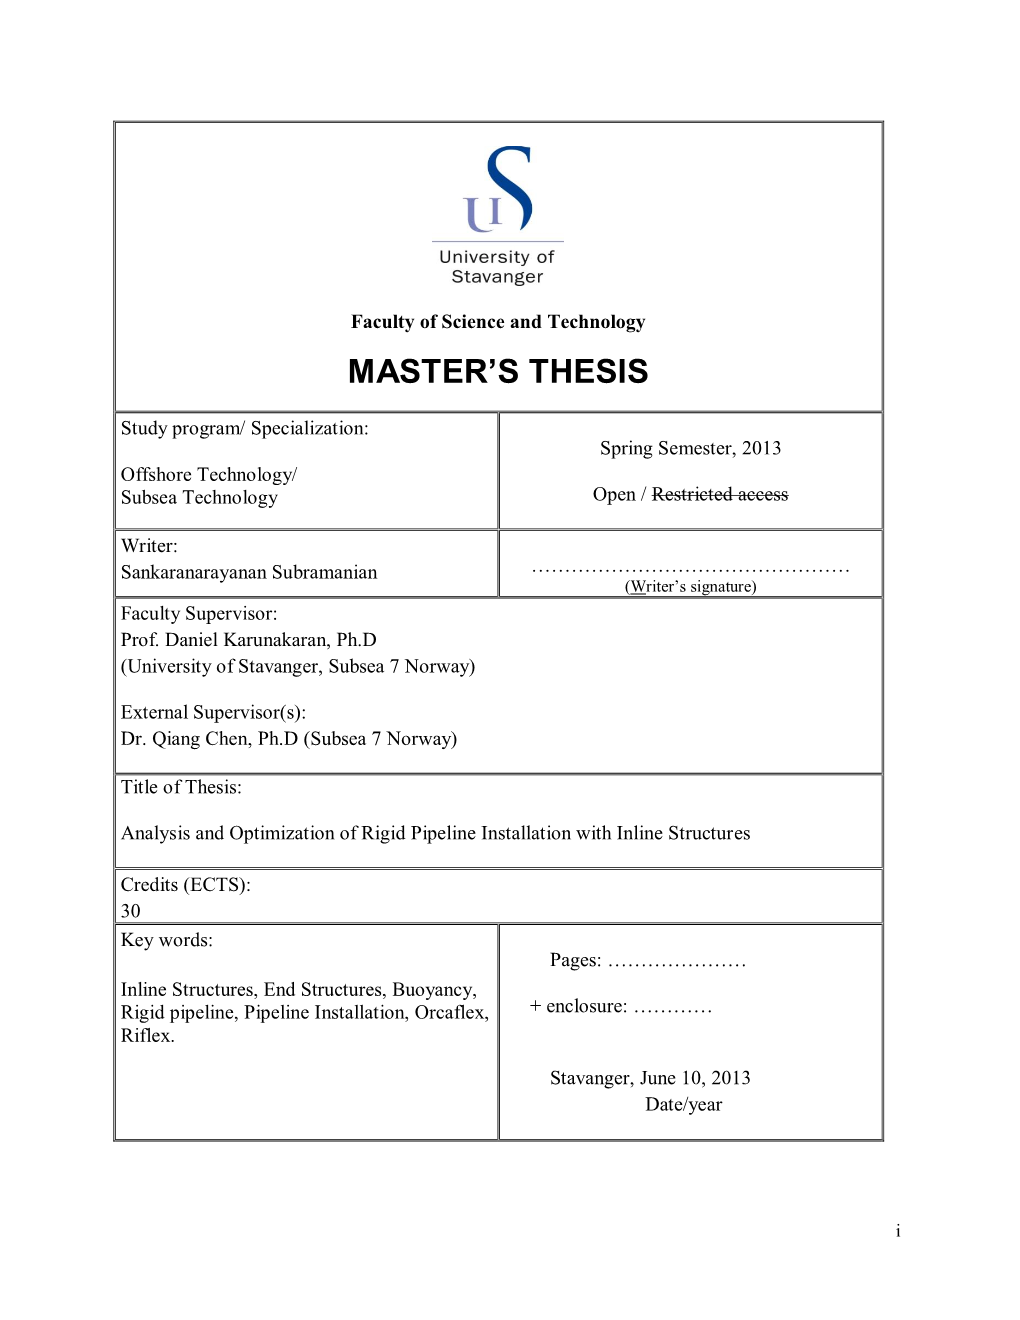 Master Thesis Analysis and Optimization of Rigid Pipeline